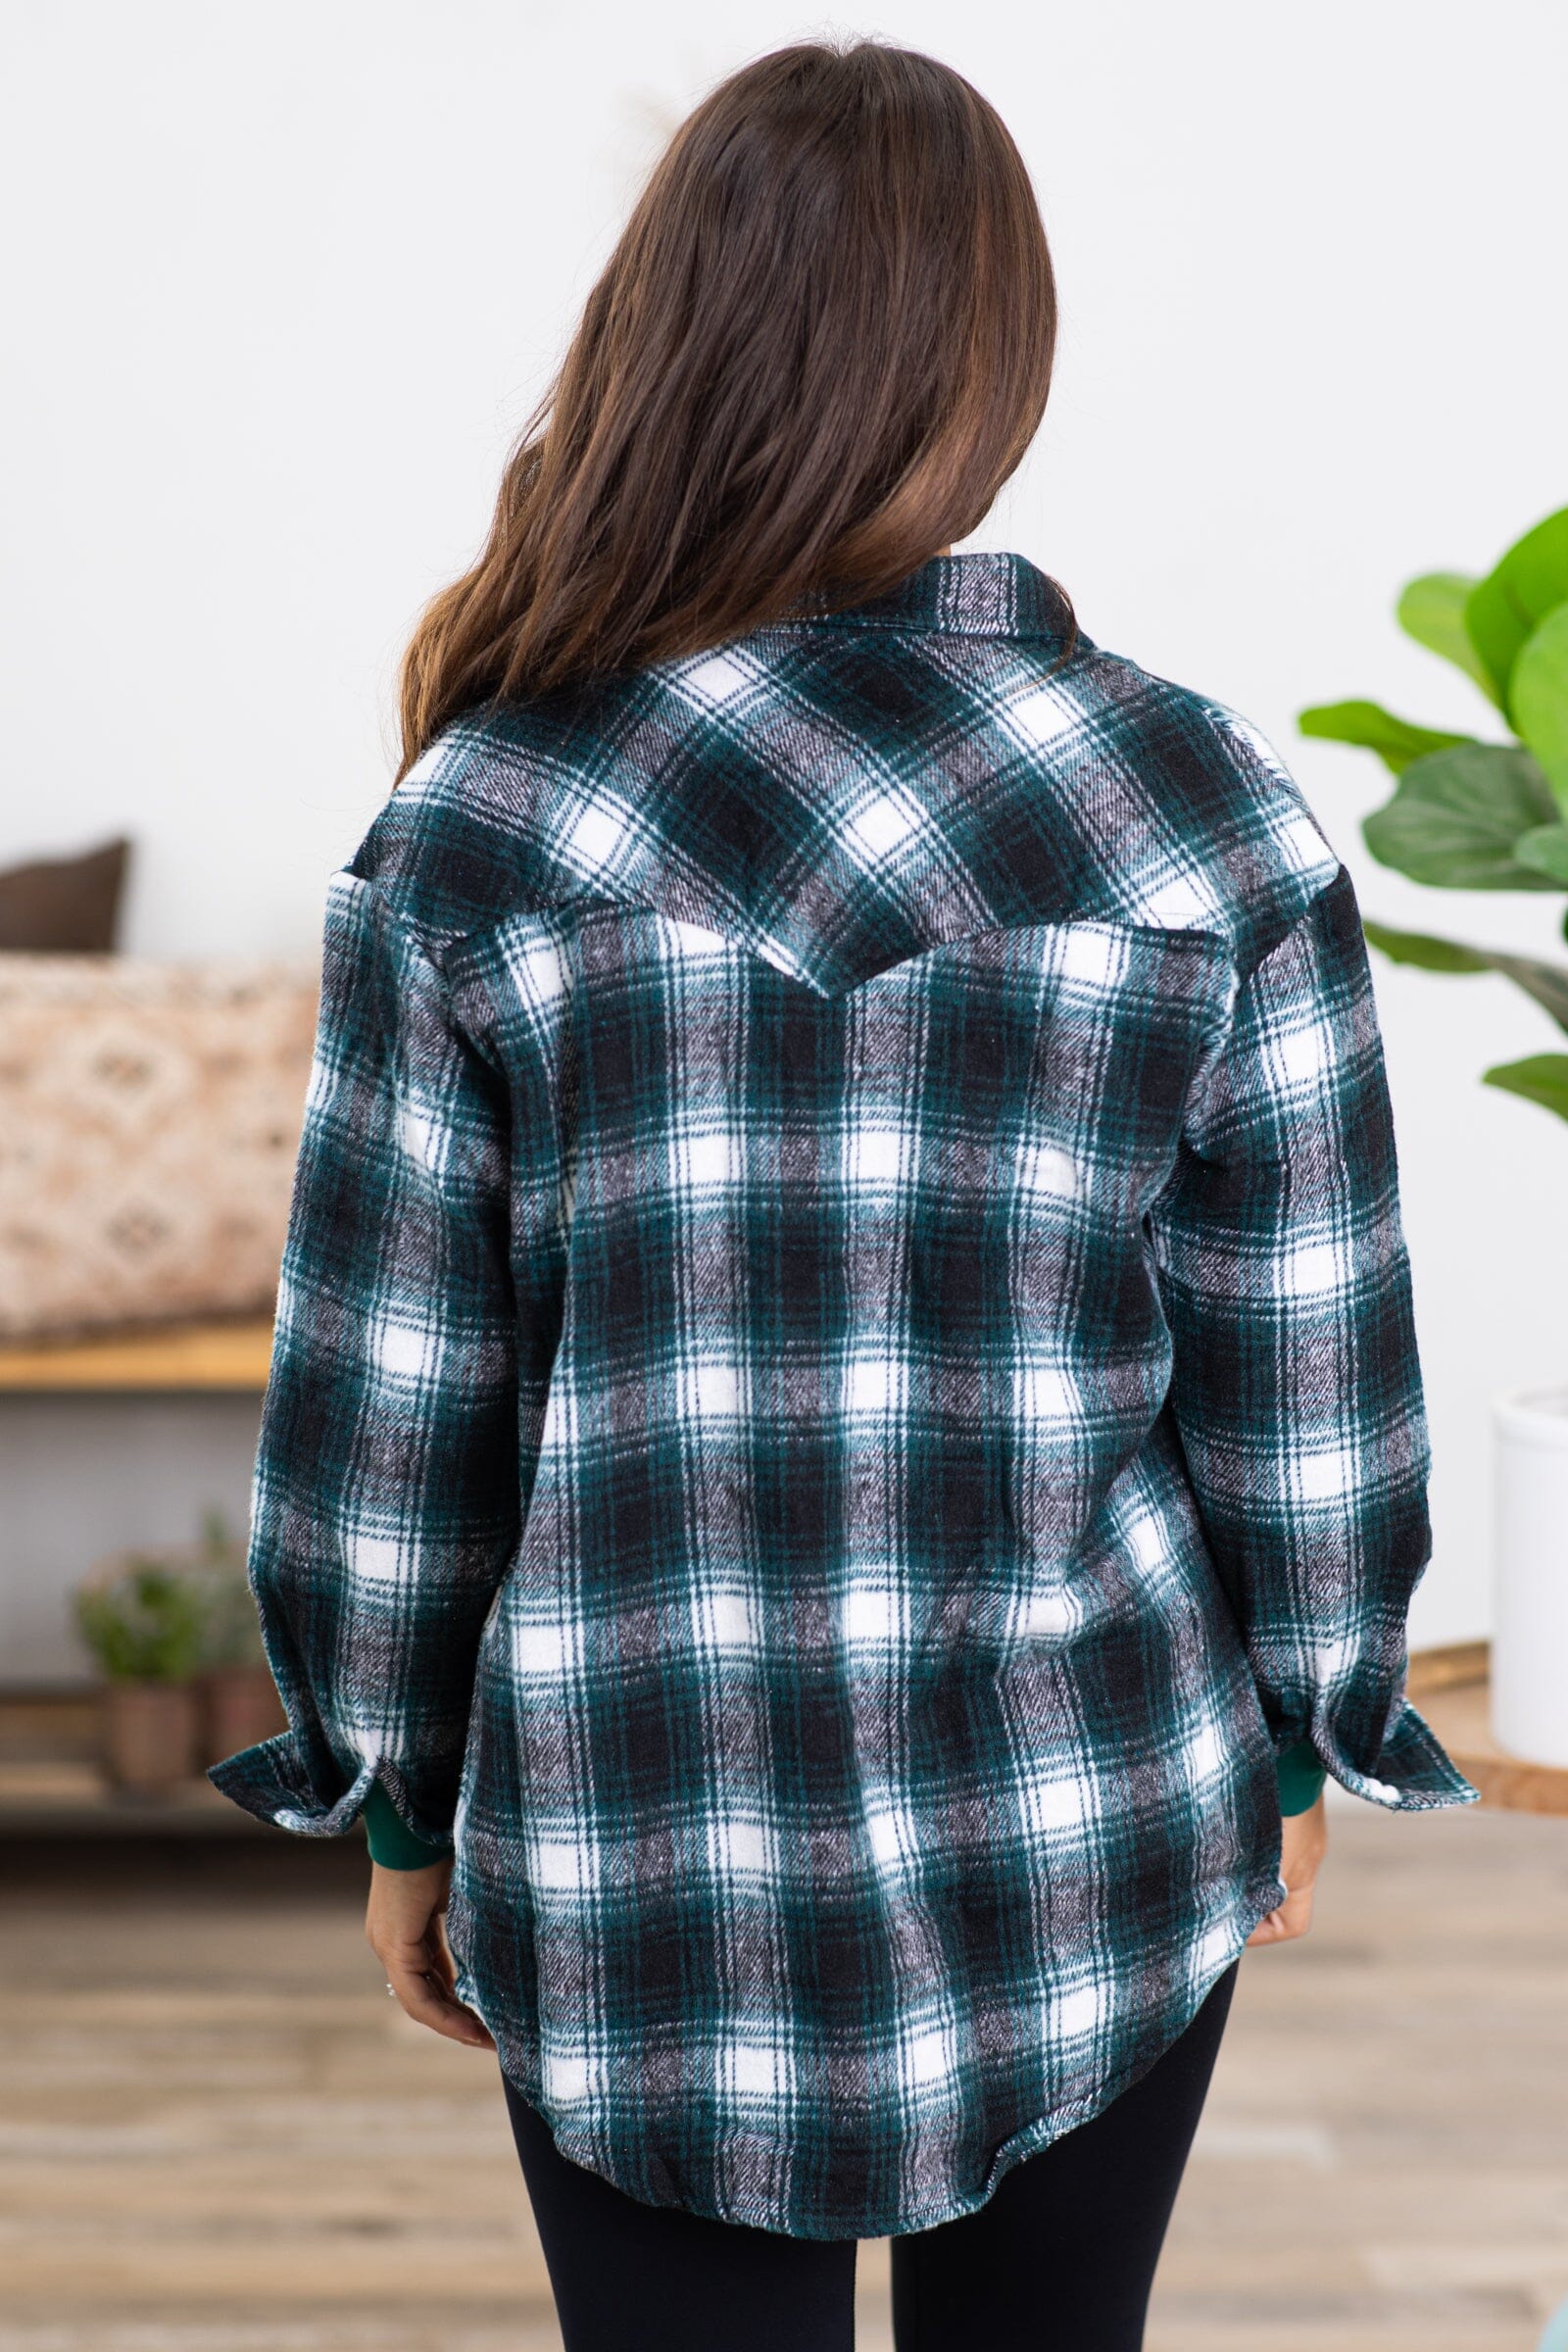 Black and Emerald Green Plaid Shacket - Filly Flair